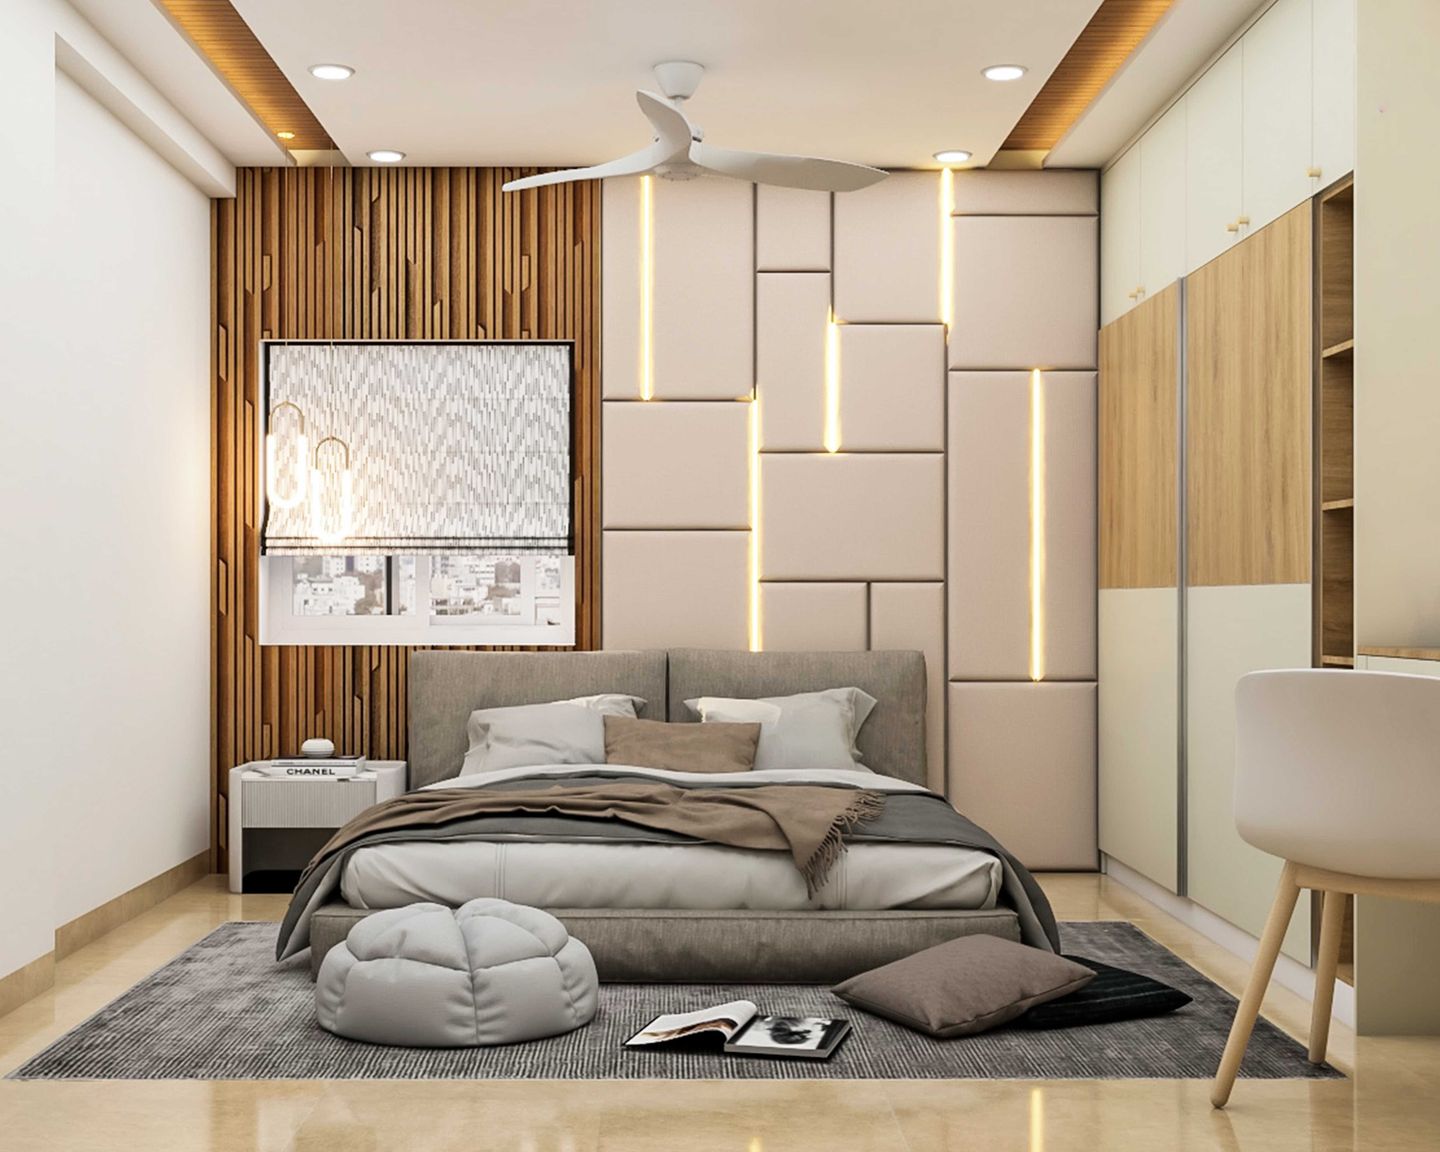 Master Bedroom Design With Wood And Beige Wall Design - Livspace